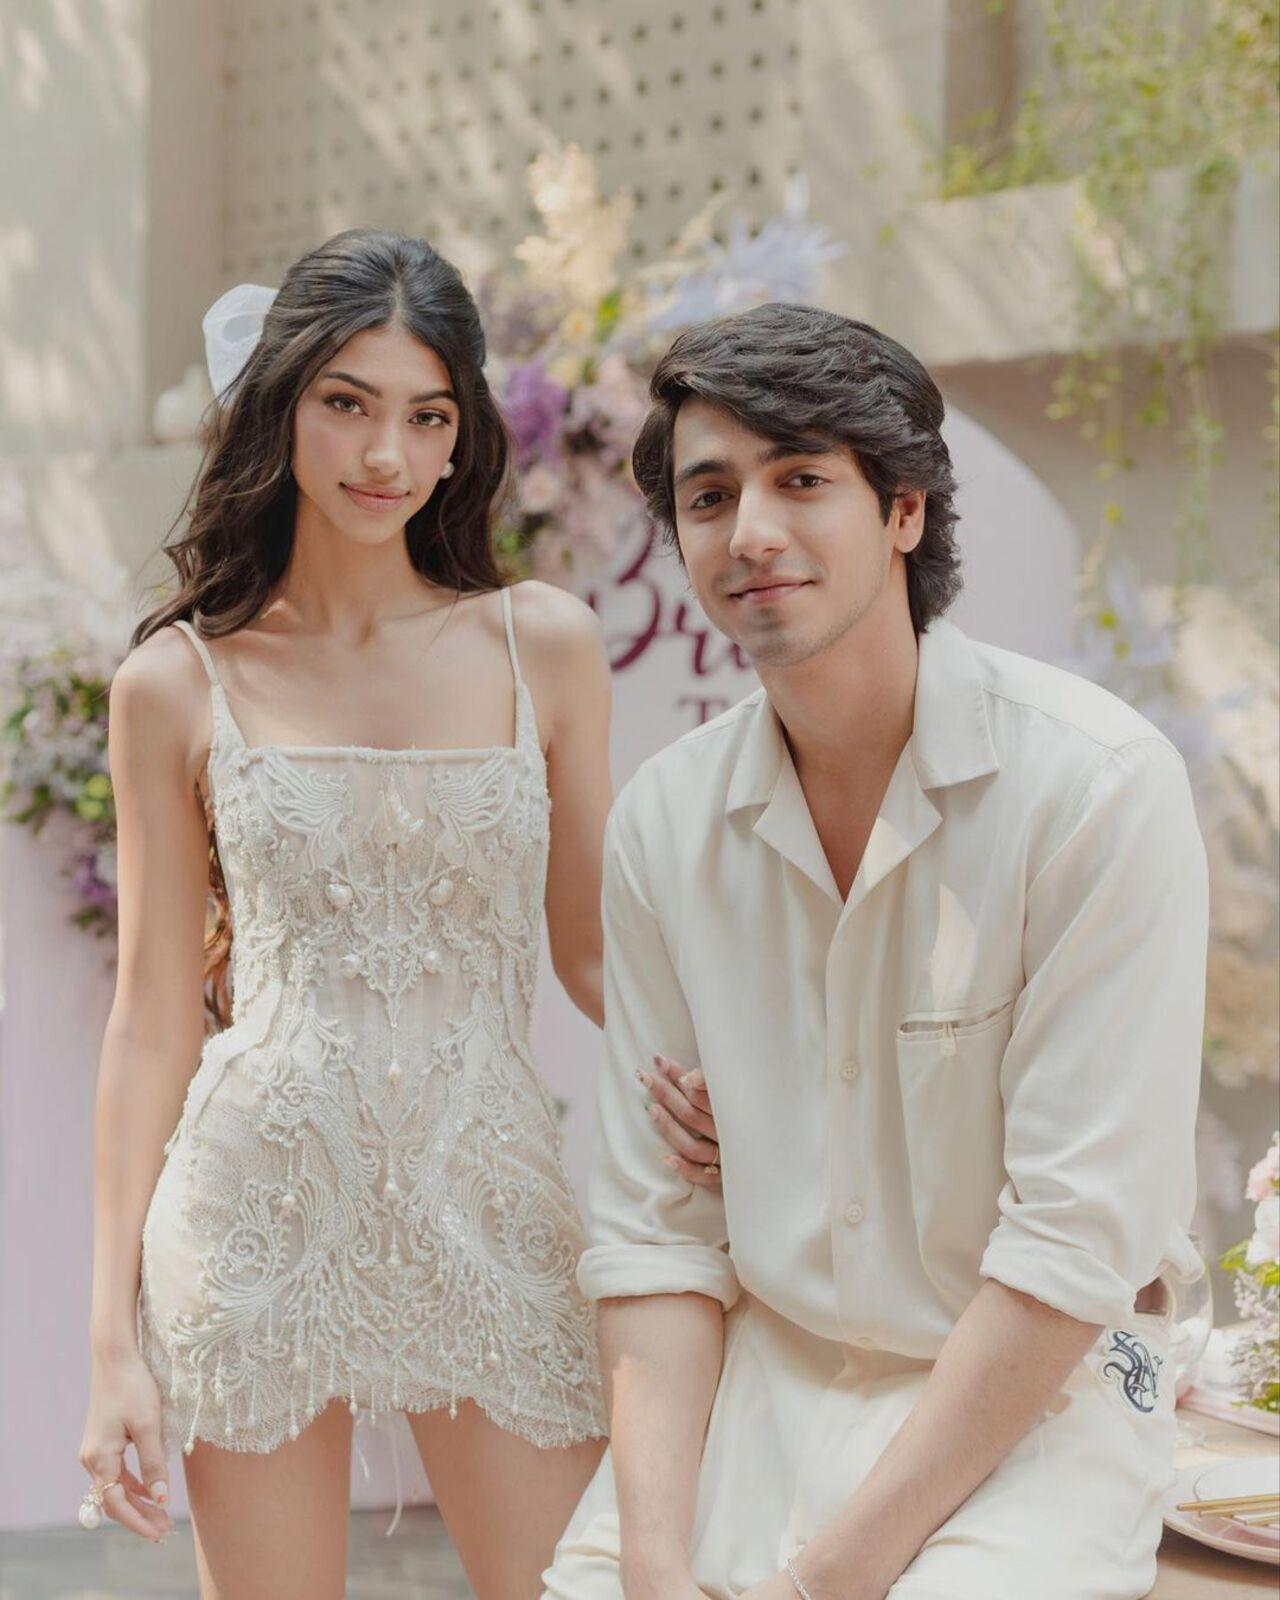 The Panday siblings are gorgeous, aren't they?